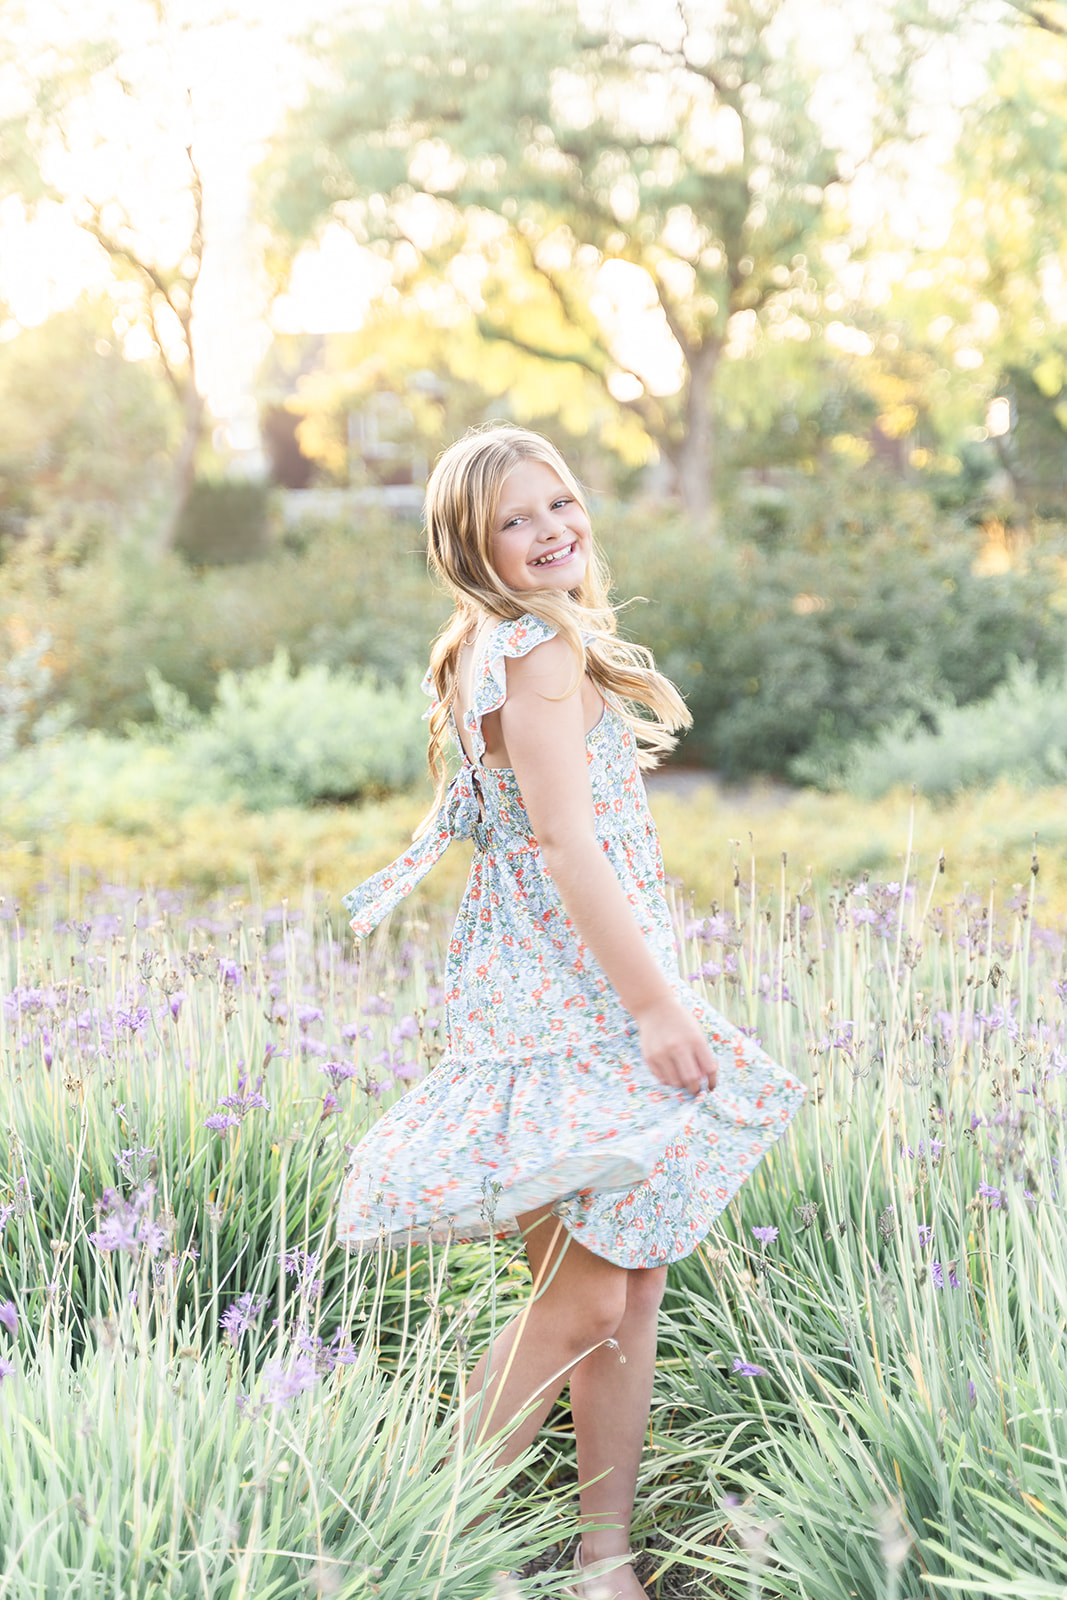 A teenage girl twirls and dances in a garden of purple flowers after attending Toddler Activities Orange County